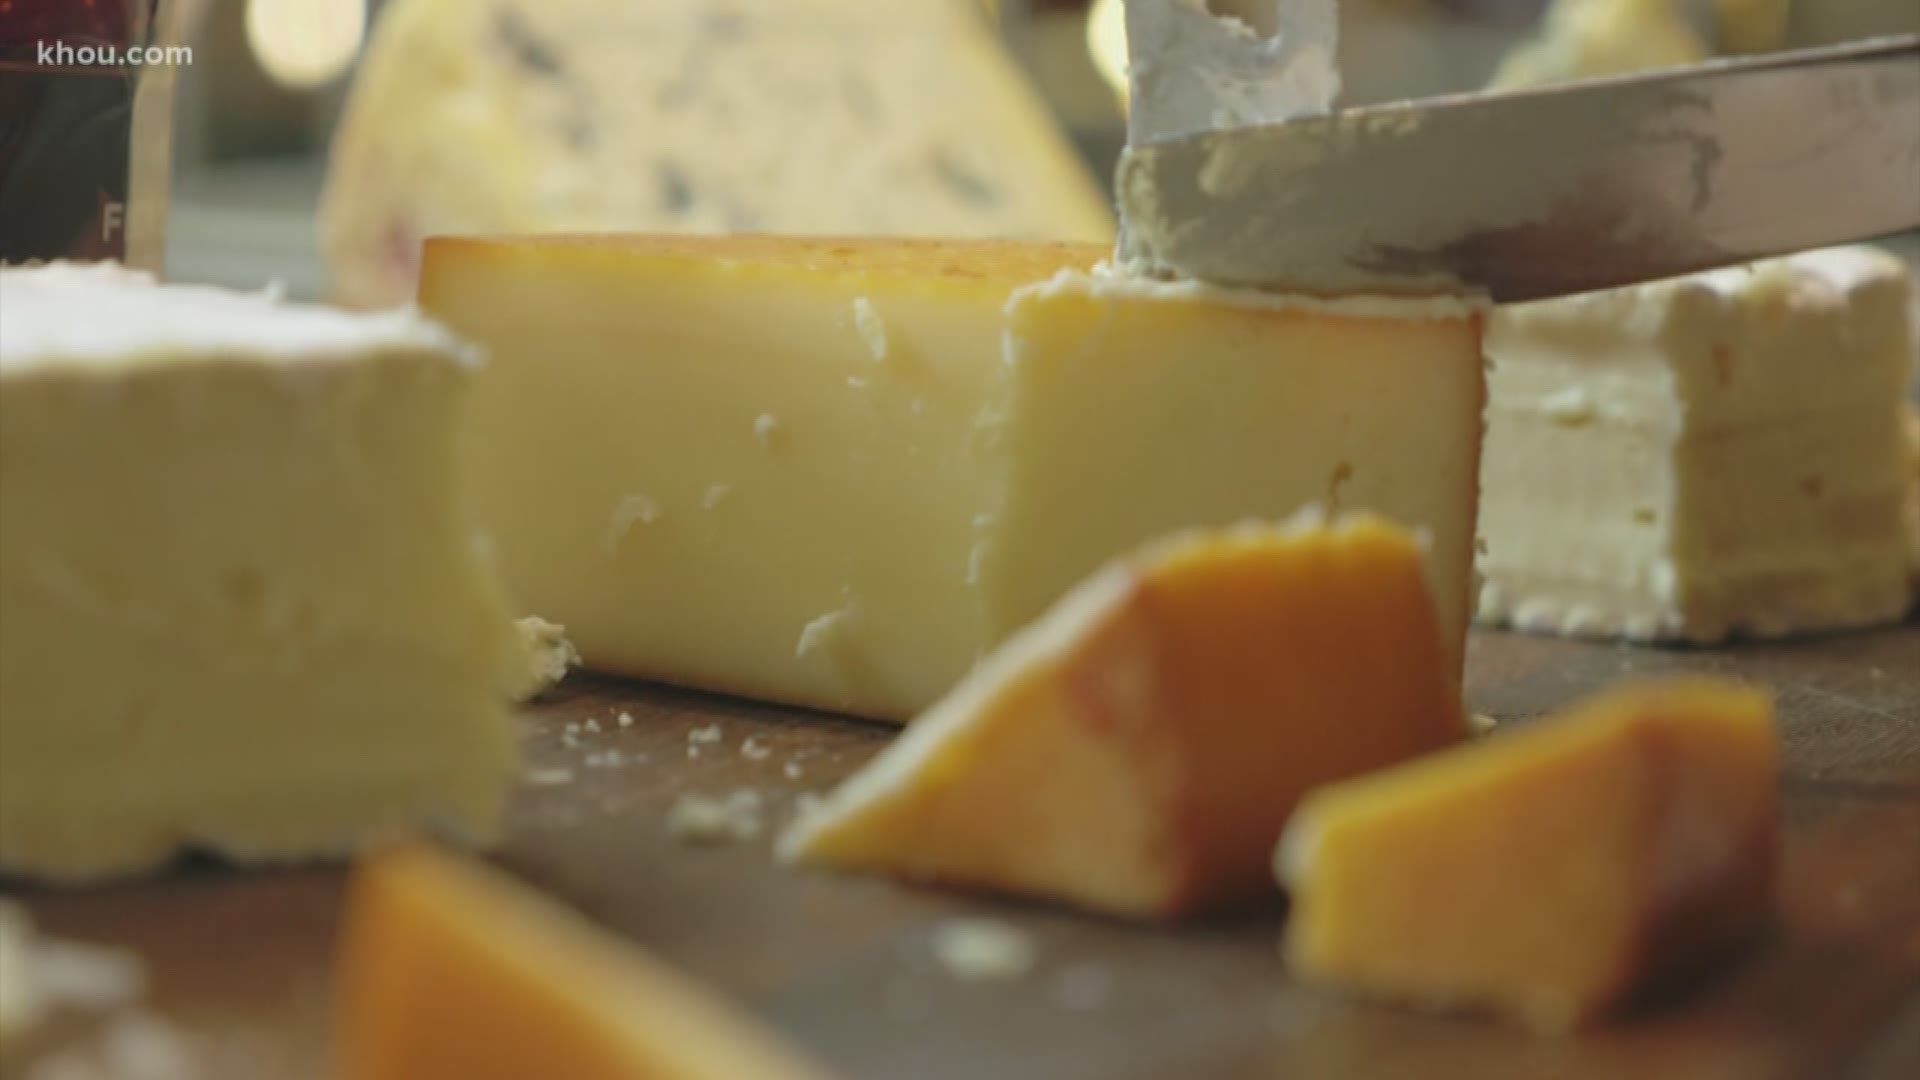 Happy National Cheese Day! Here are a few cheese facts you probably didn't know